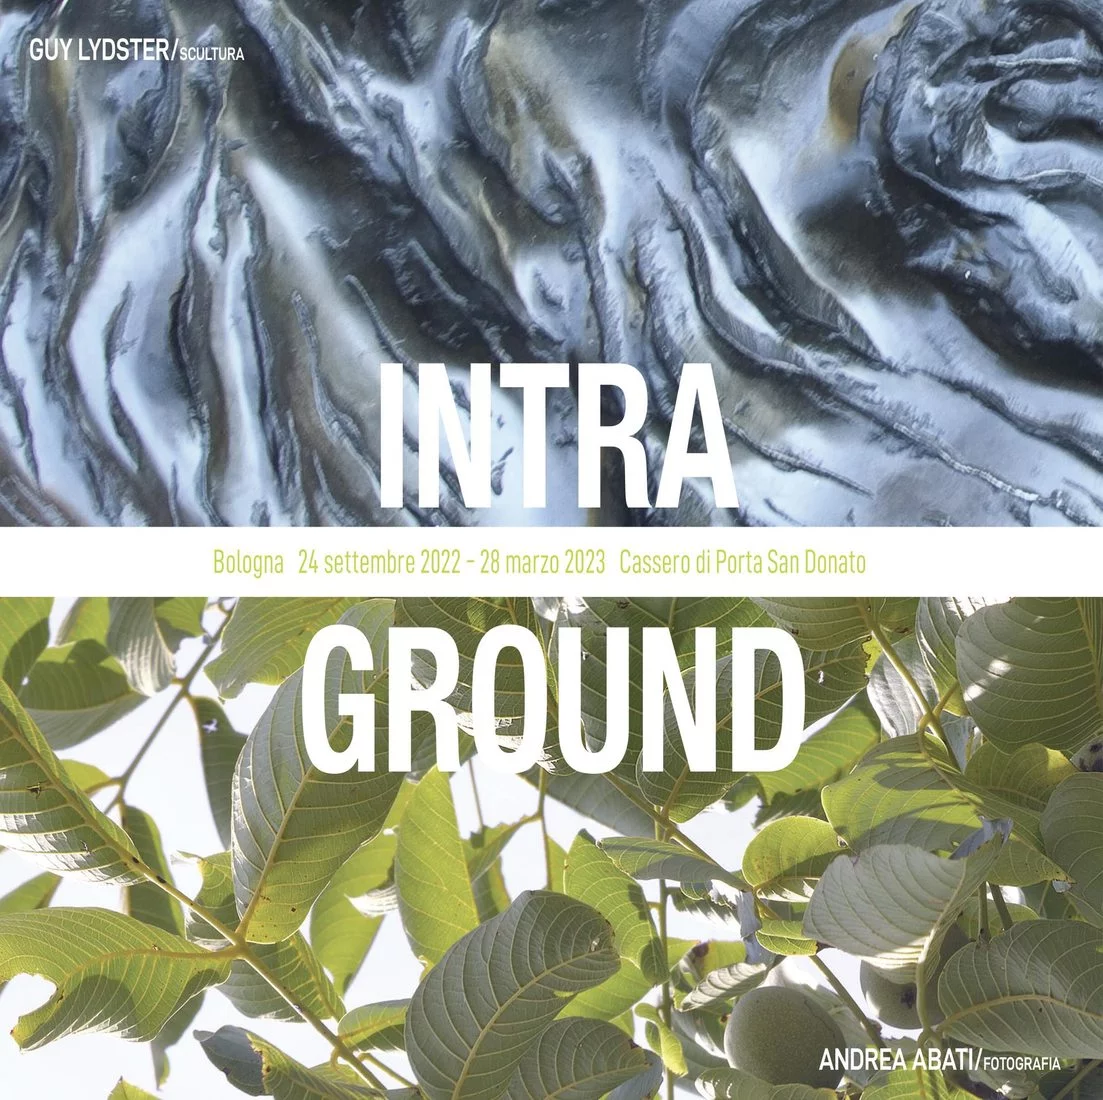 Intra-ground. Guy Lydster e Andrea Abiati